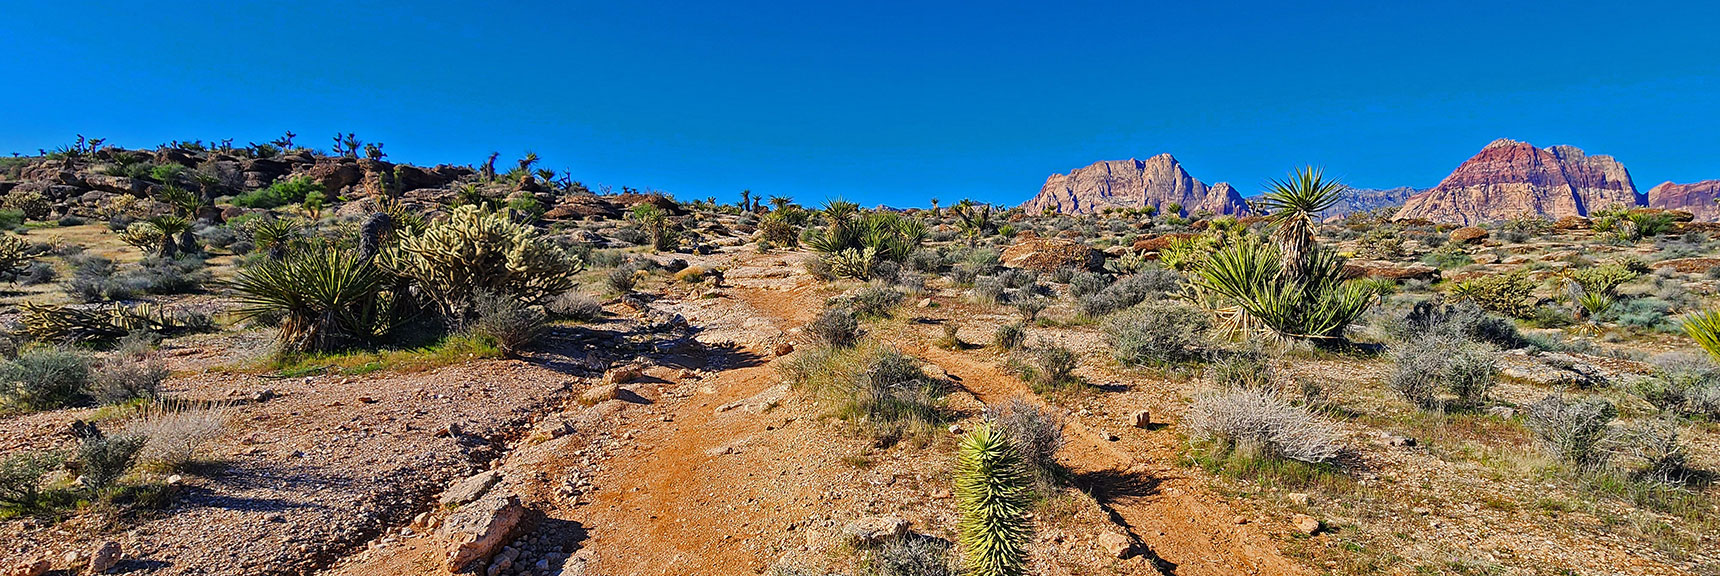 Head Up the Ridge Where You Will Find the Fossil Ridge Trail. | Fossil Canyon | Cowboy Canyon | Blue Diamond Hill, Nevada